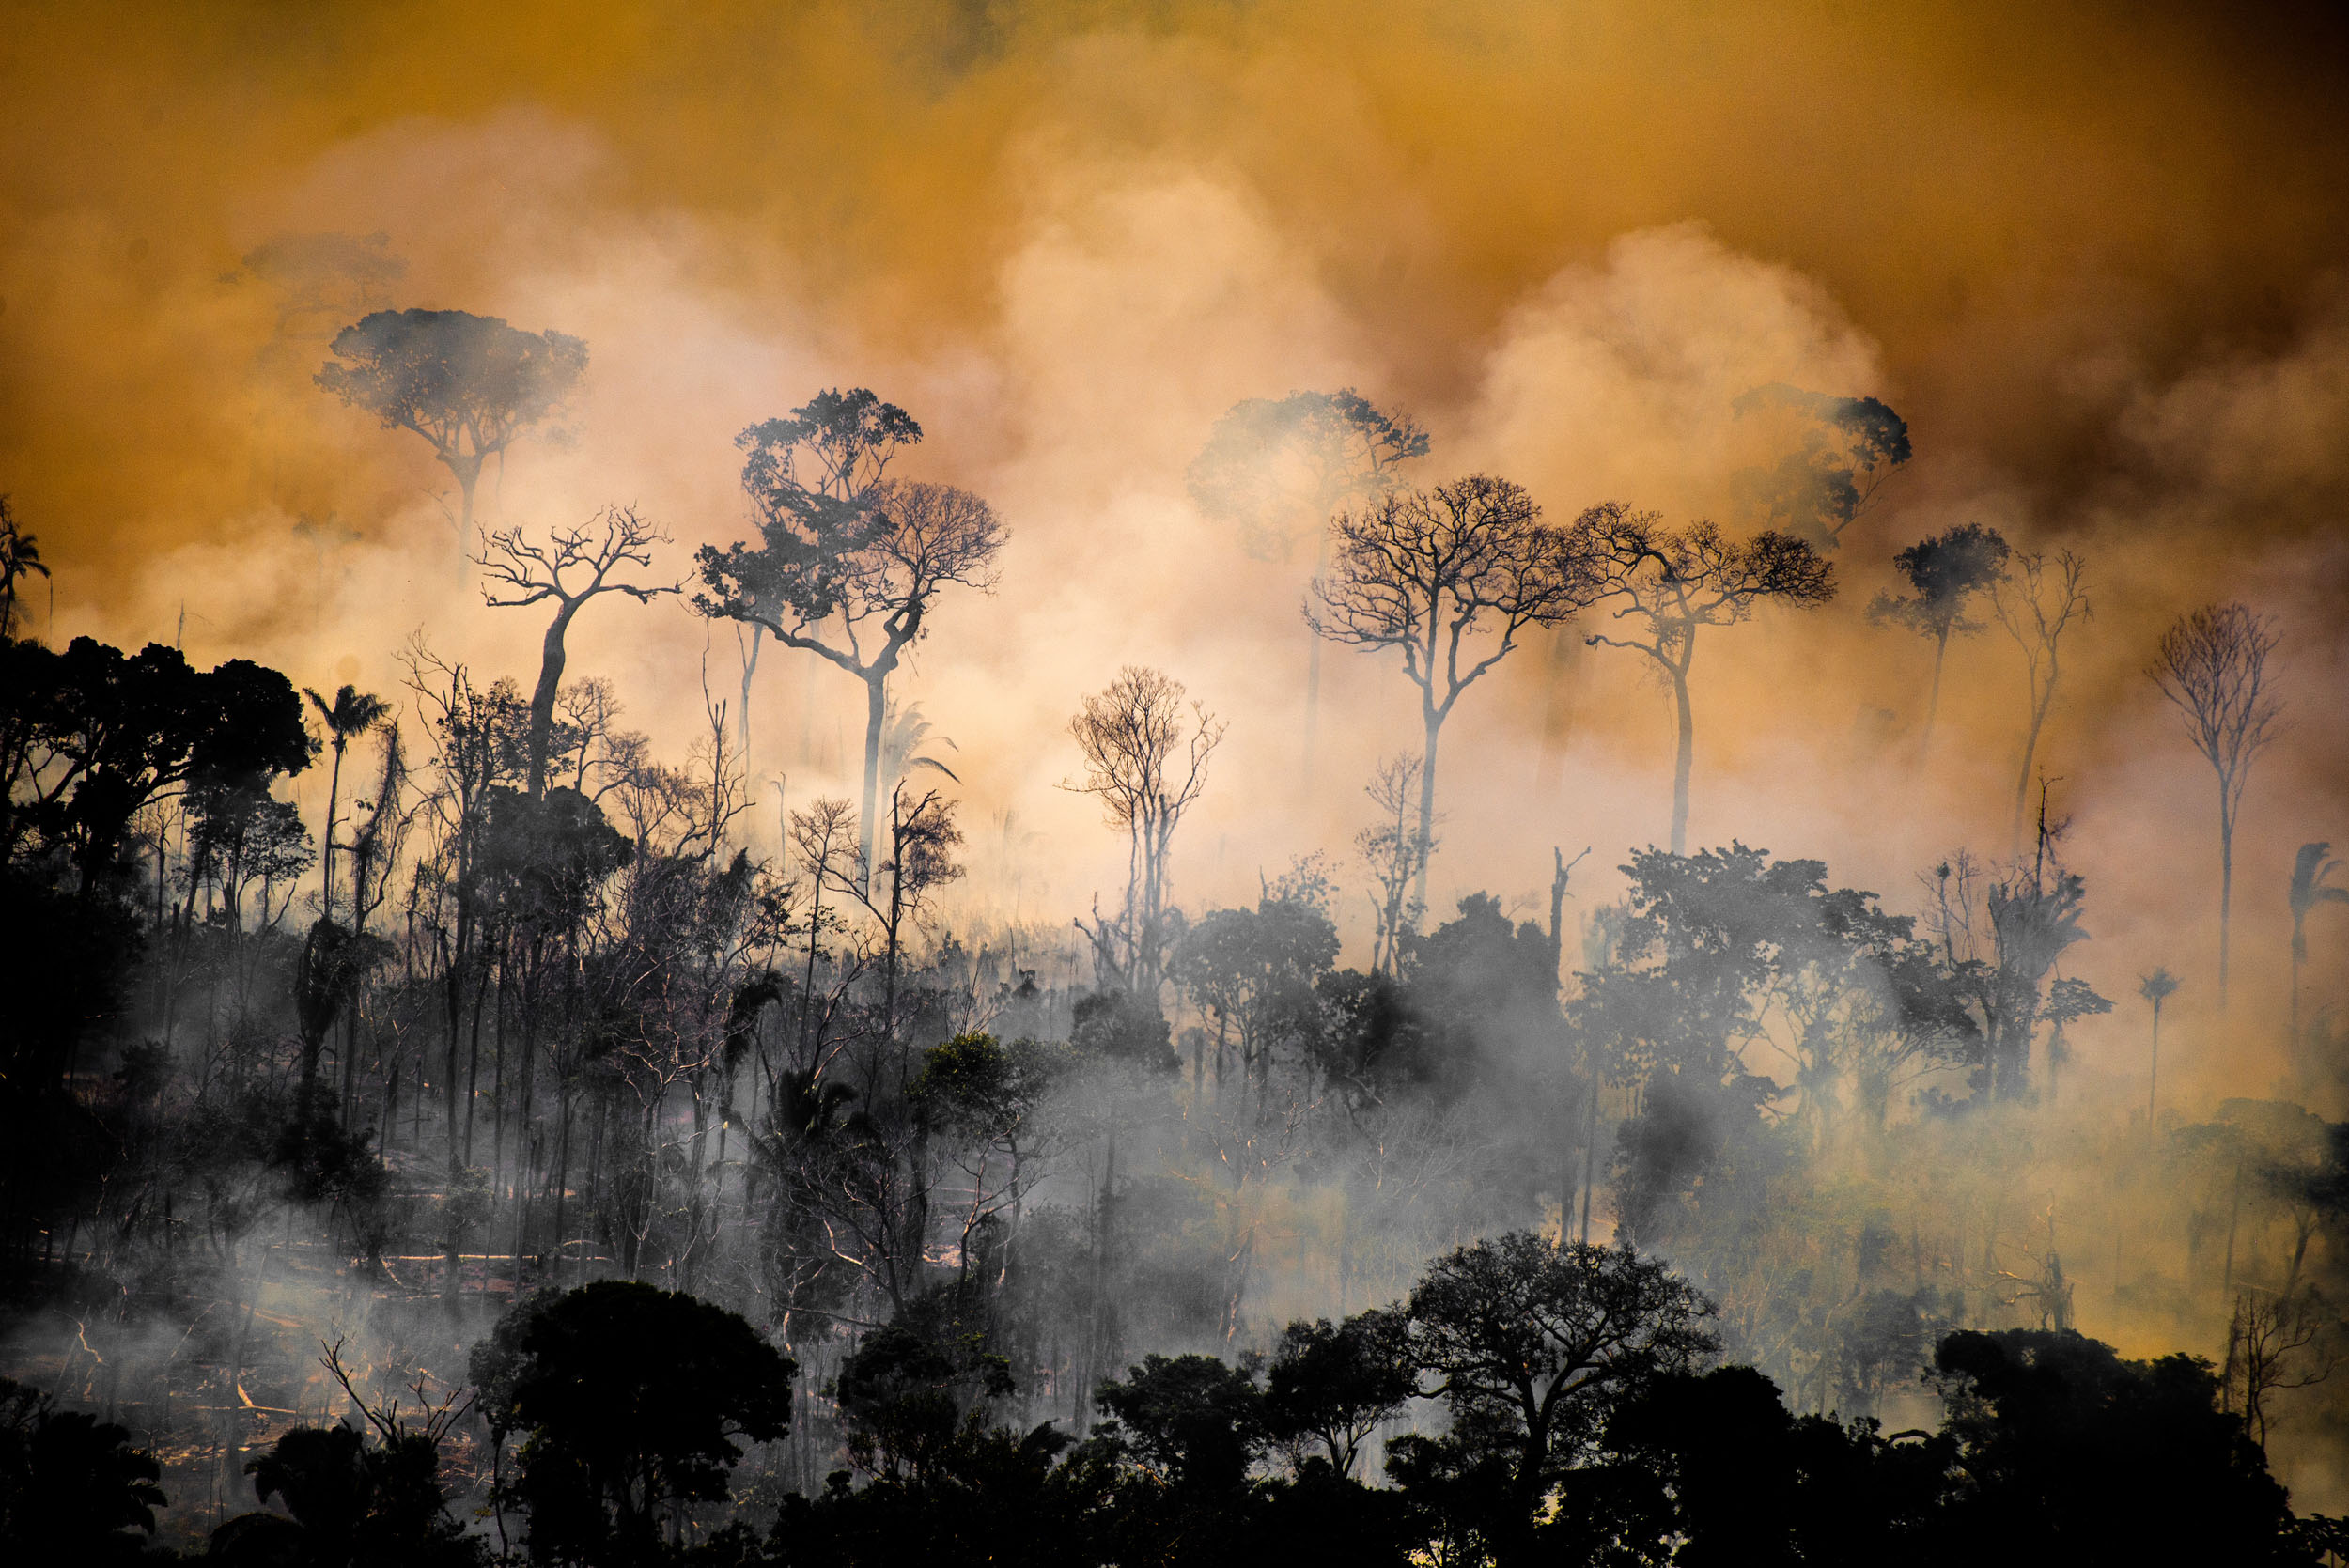 Rainforest trees are silhouetted against an orange backdrop of smoke from an ongoing forest fire.